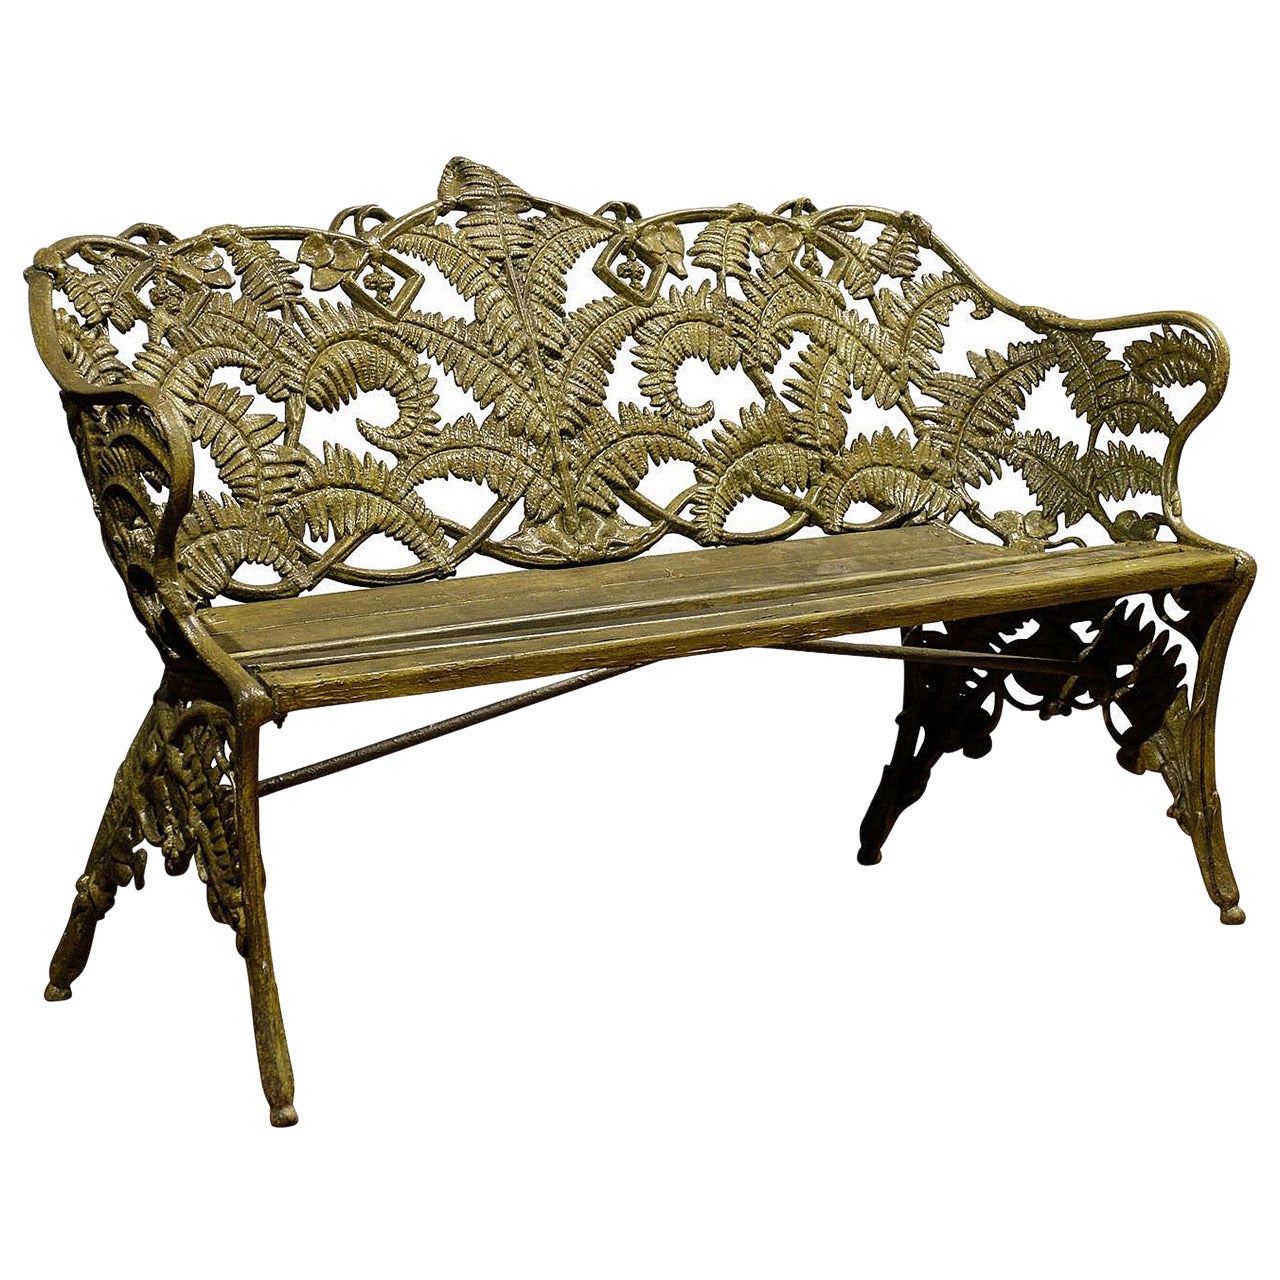 Late 19th Century Coalbrookdale Foundry Fern and Blackberry Pattern Garden Bench